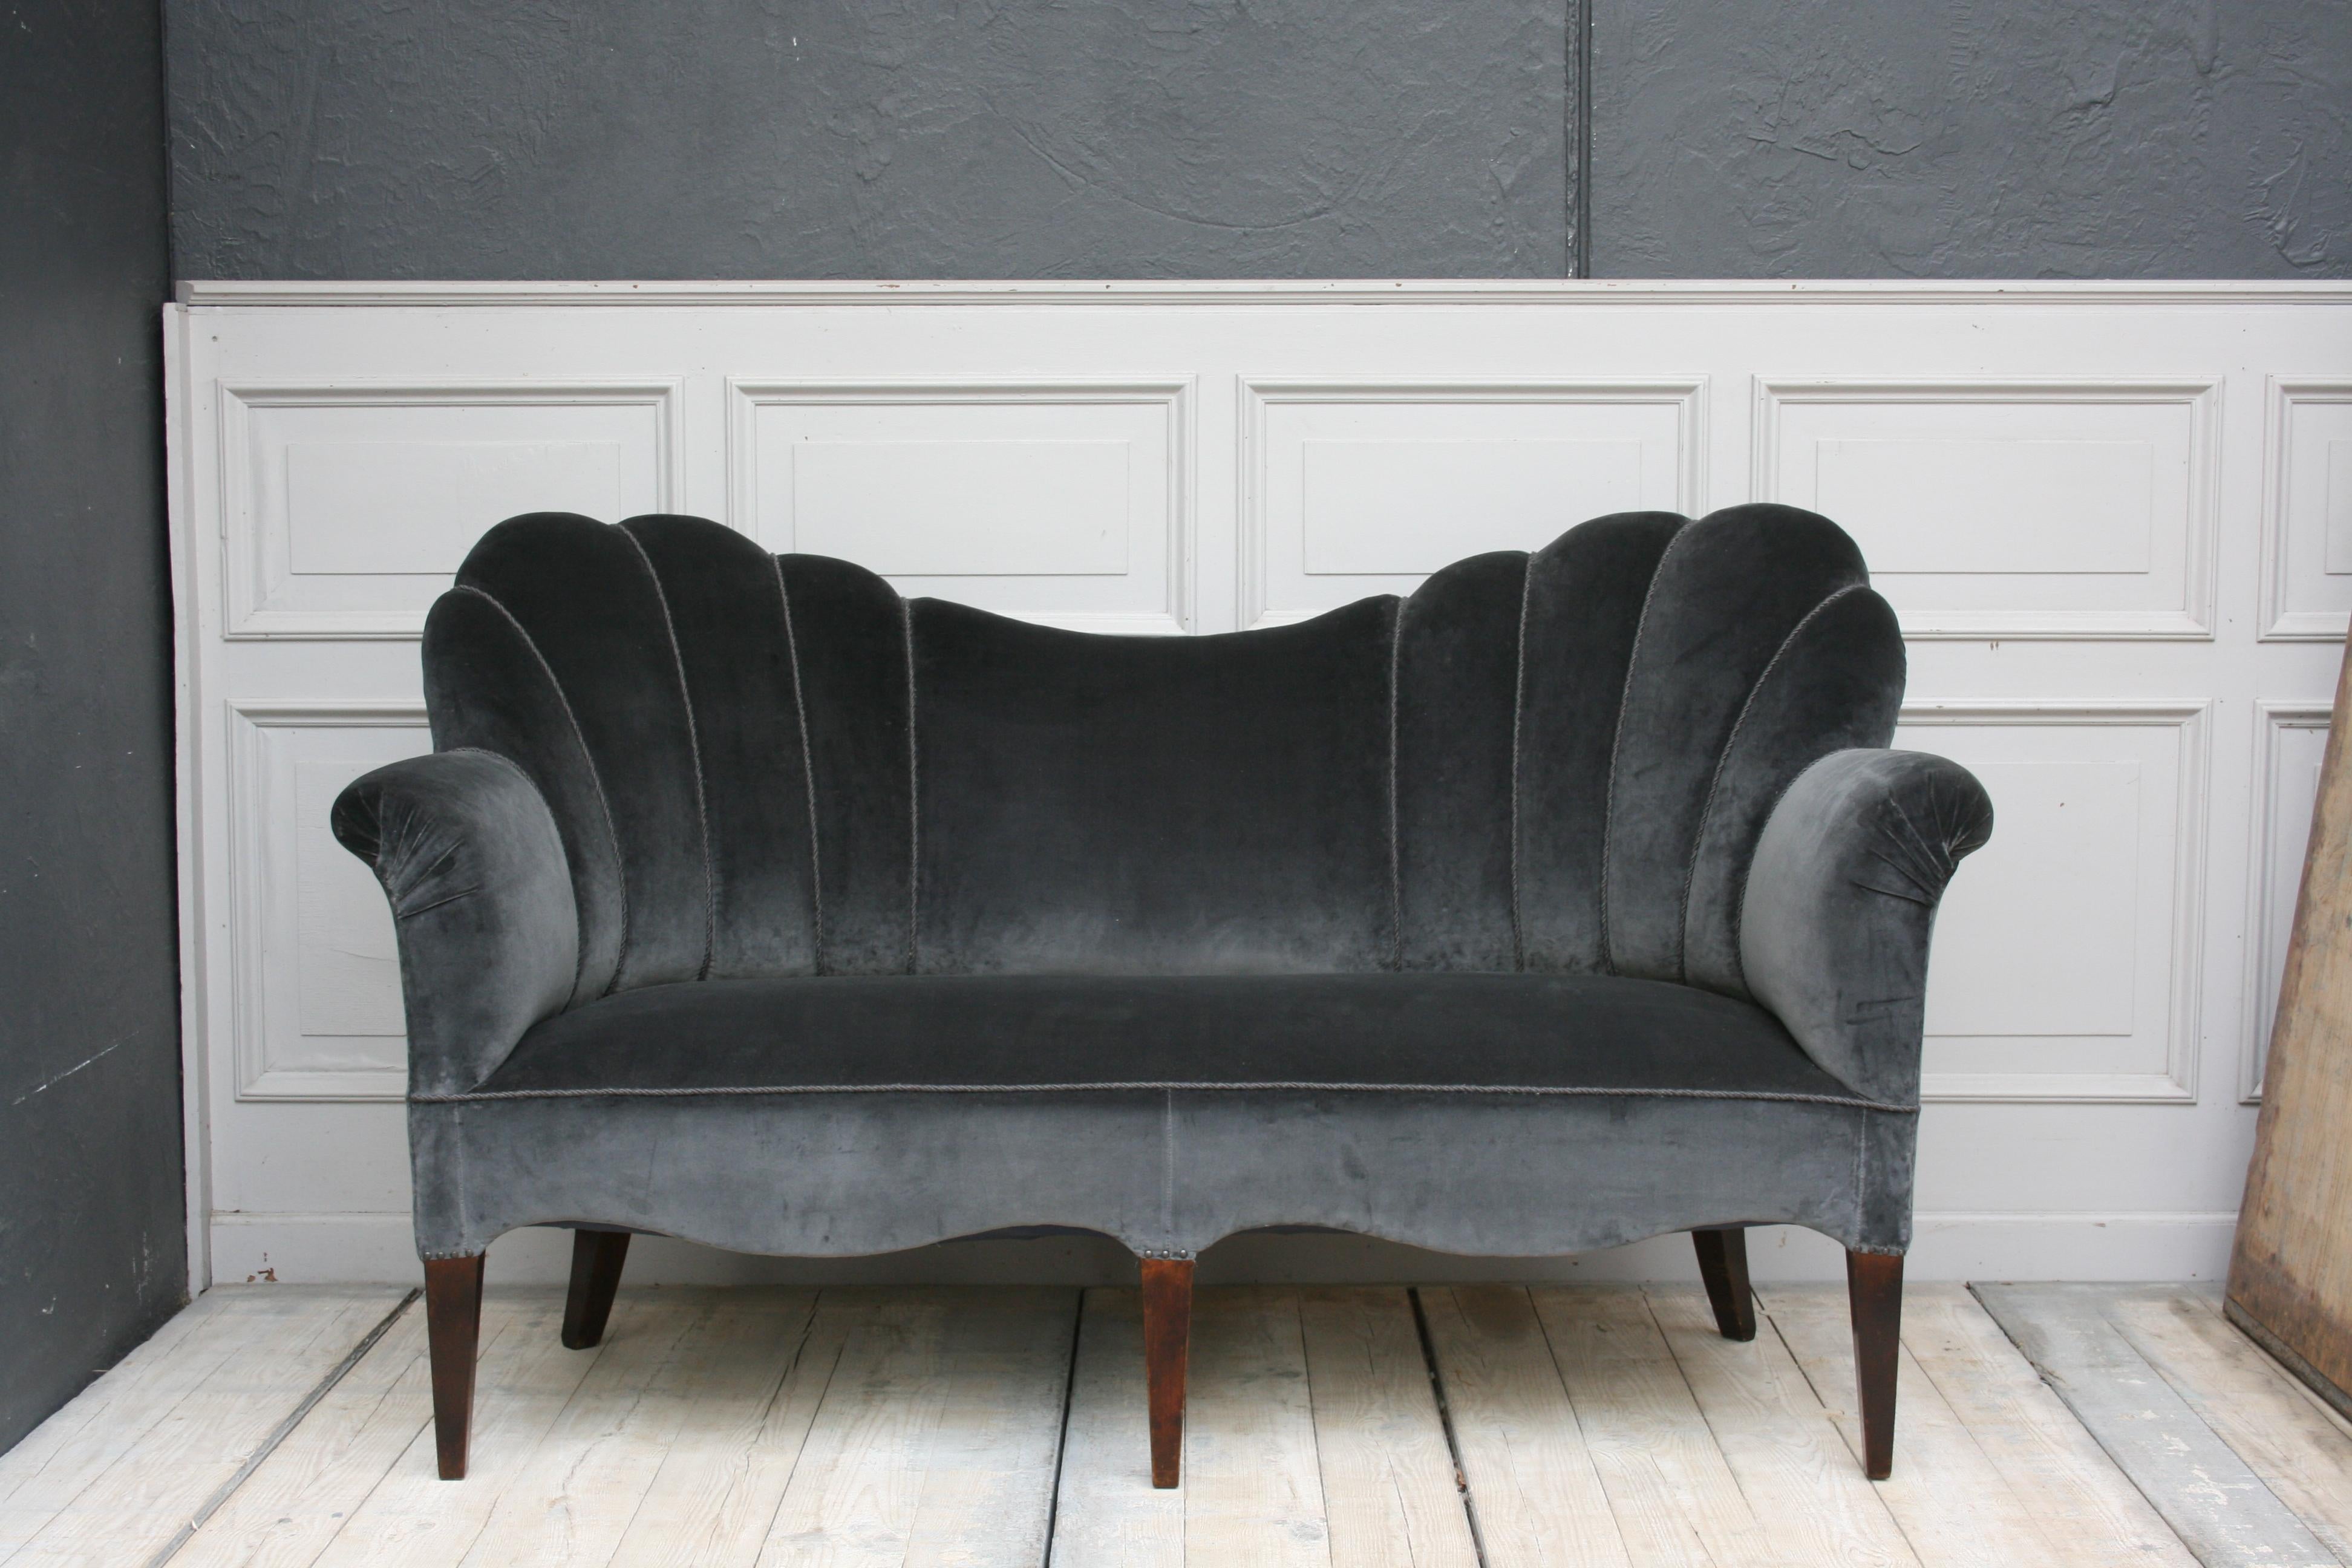 Beautiful original Art Deco sofa from the 1930s. Standing on 6 feet. Elegant curved design. New upholstery in gray velvet fabric.

Dimensions: 100 cm high, 165 cm wide, 65 cm deep, seat height, 45 cm.